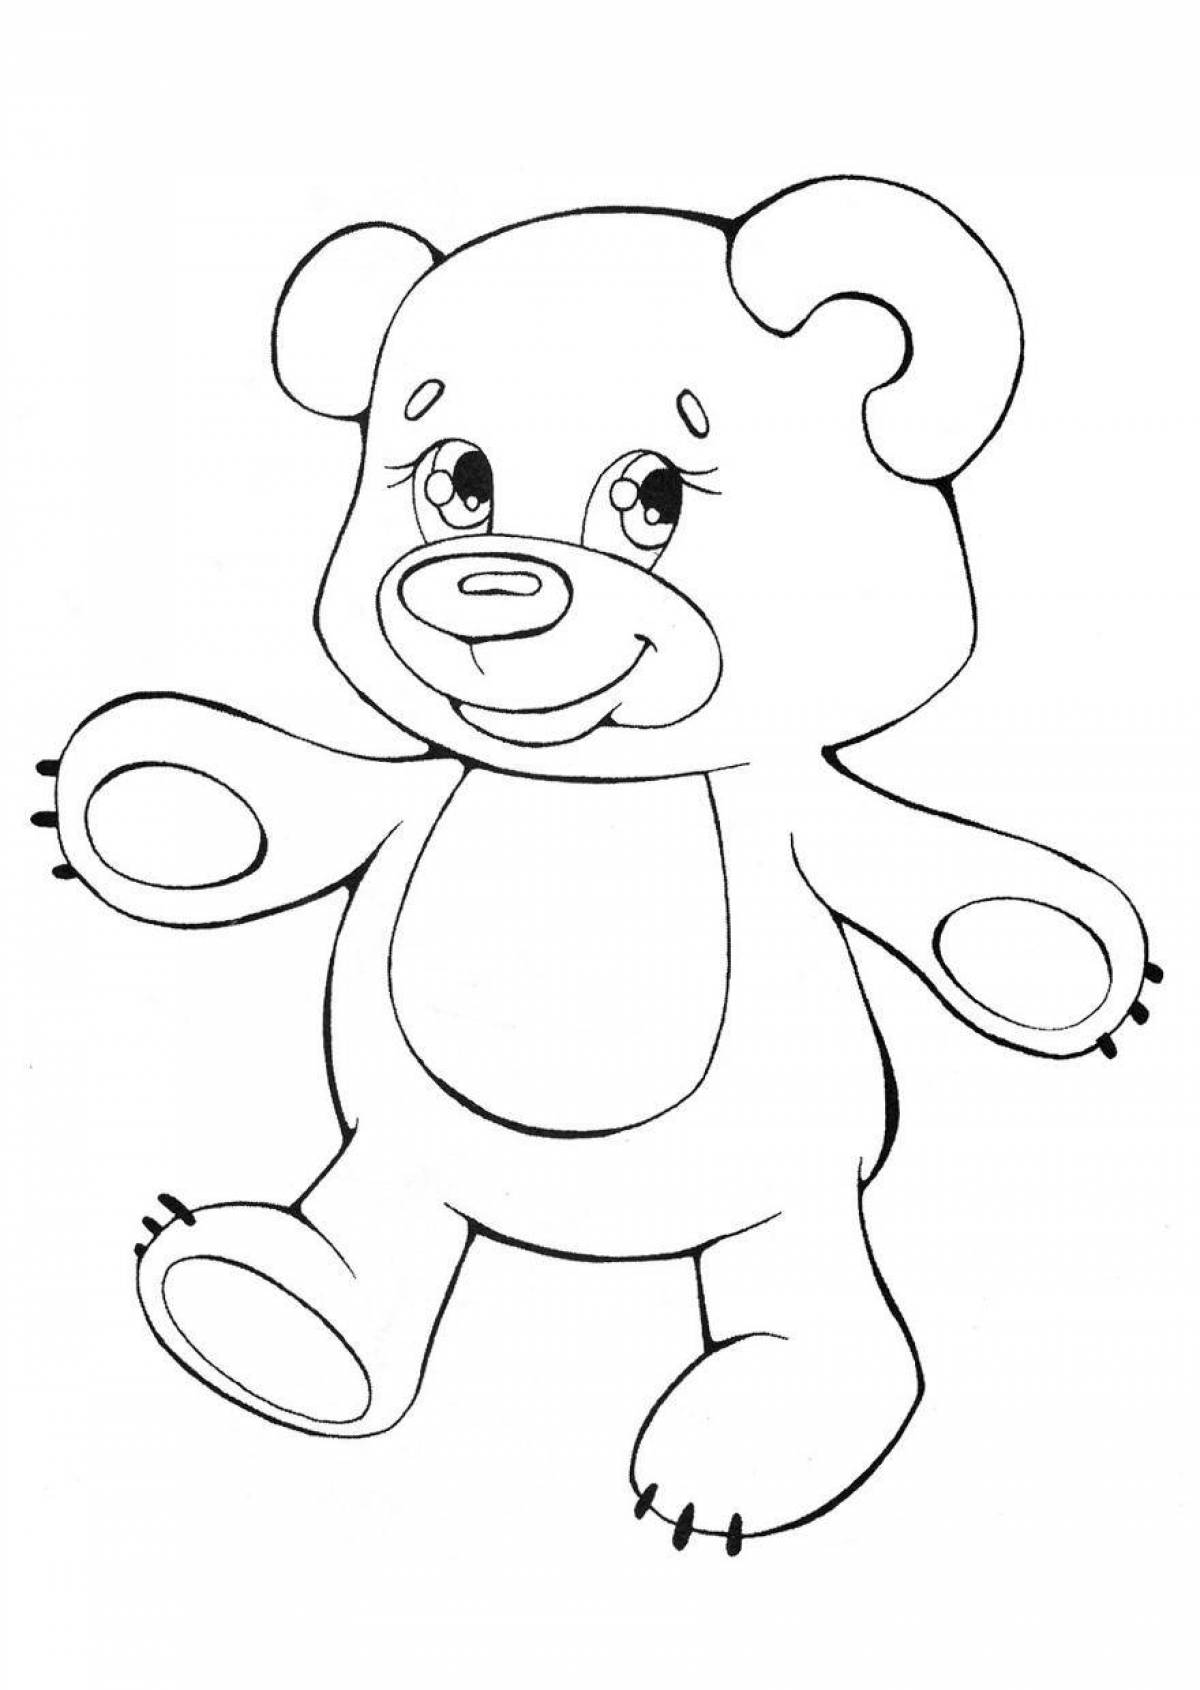 Coloring page winking teddy bear